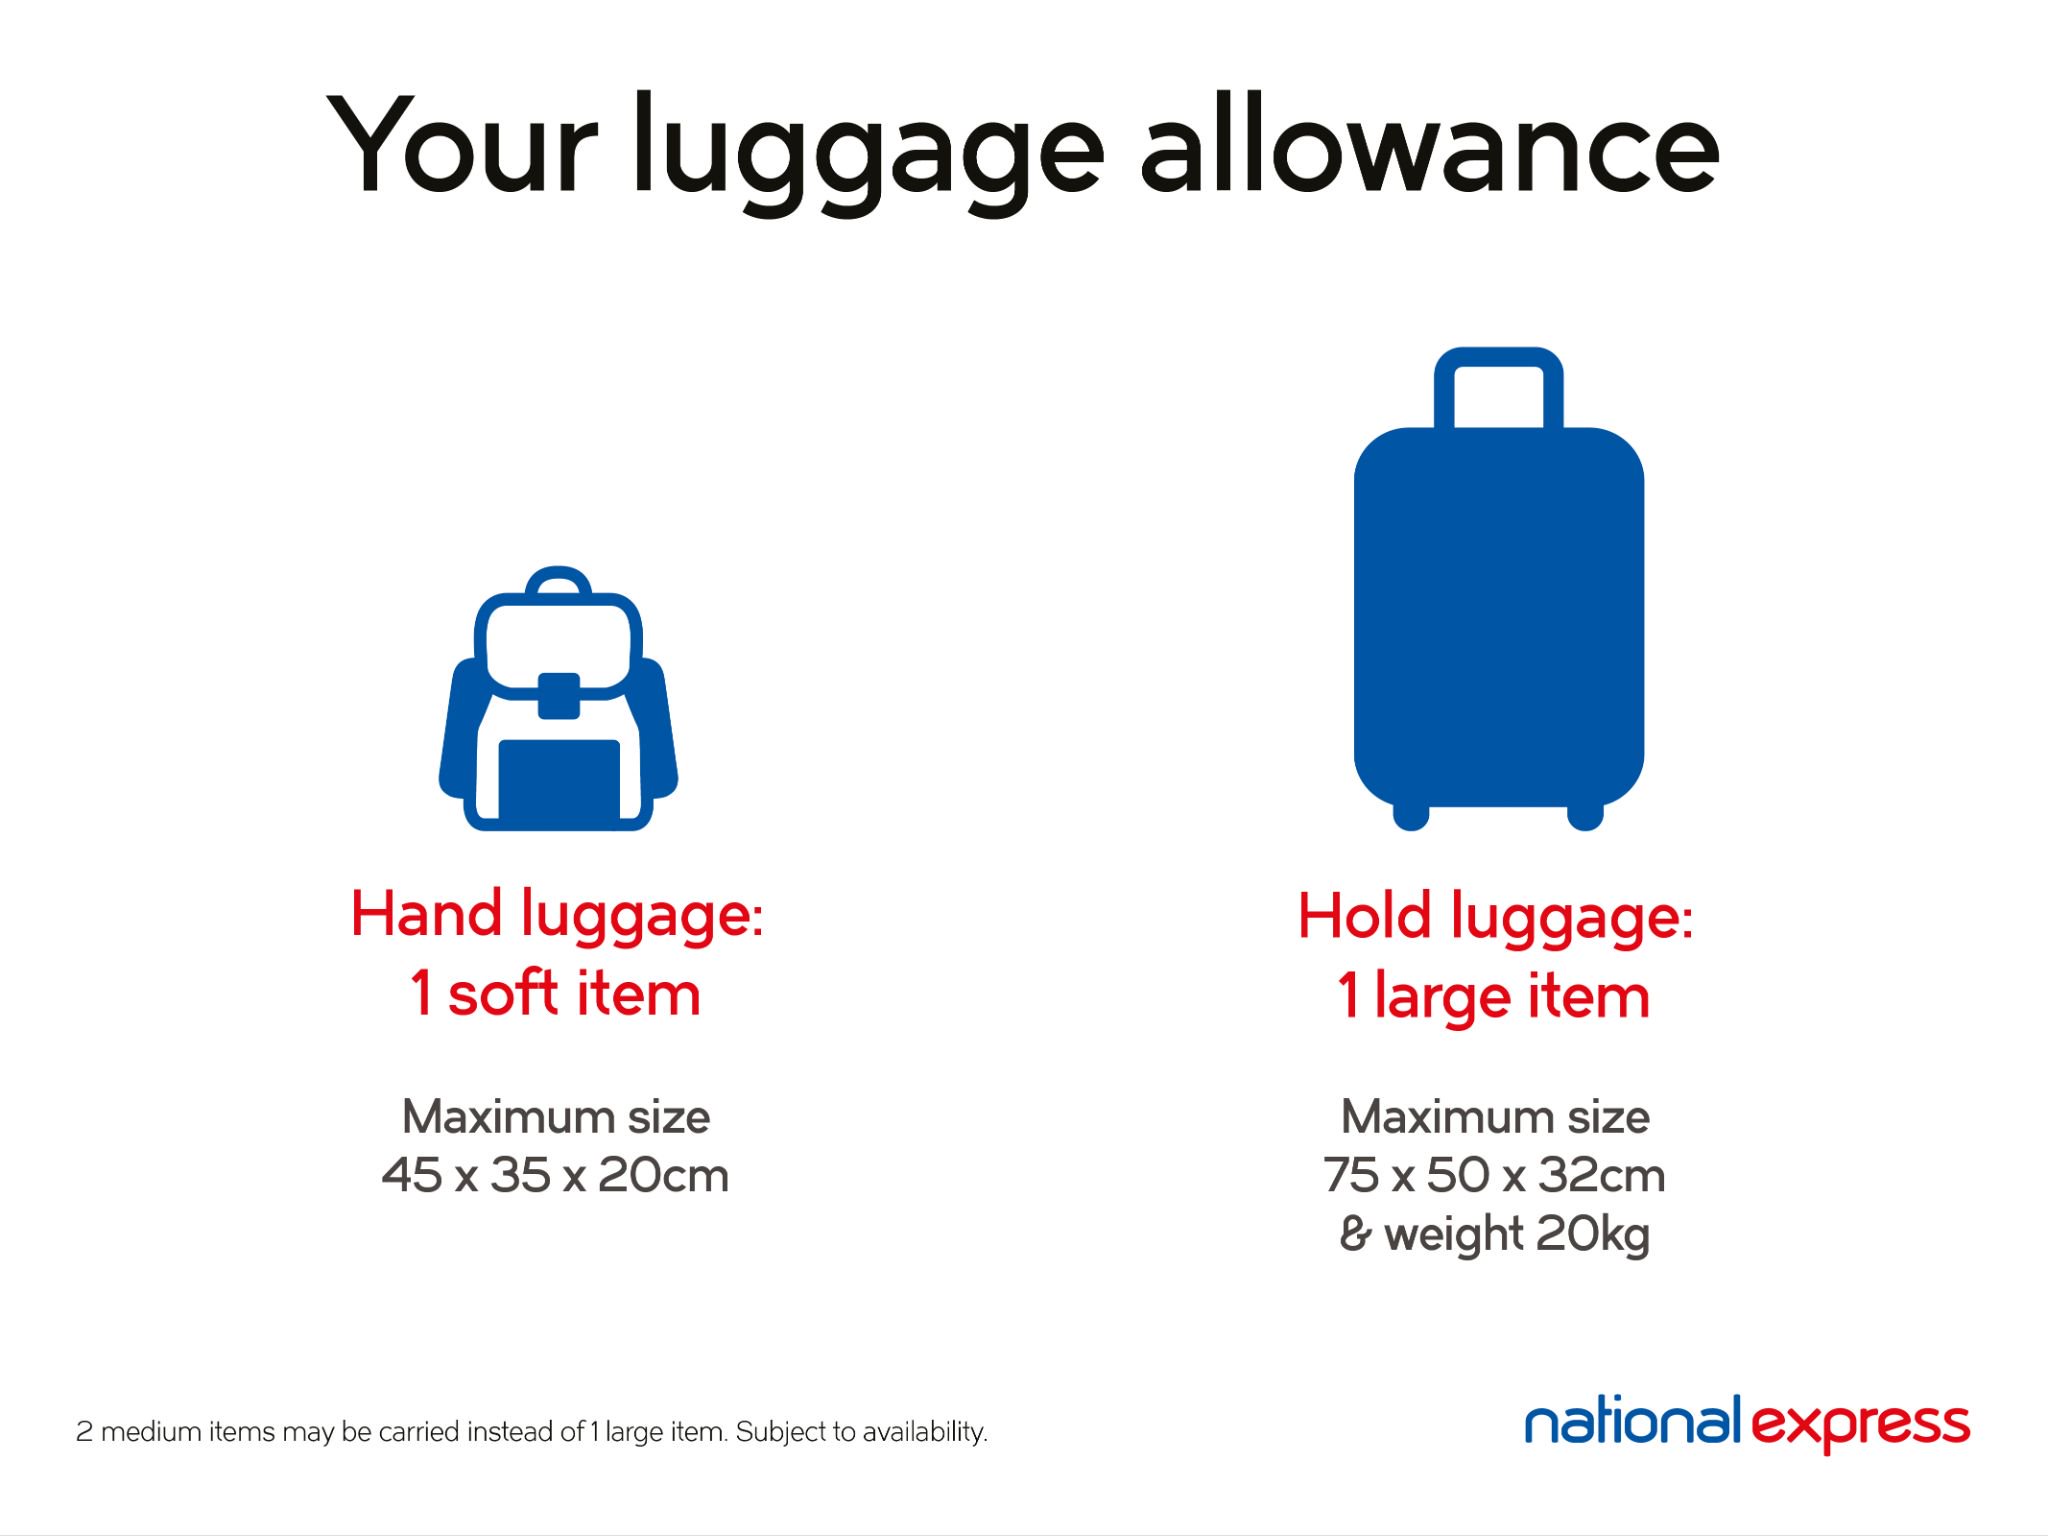 Our Luggage Policy